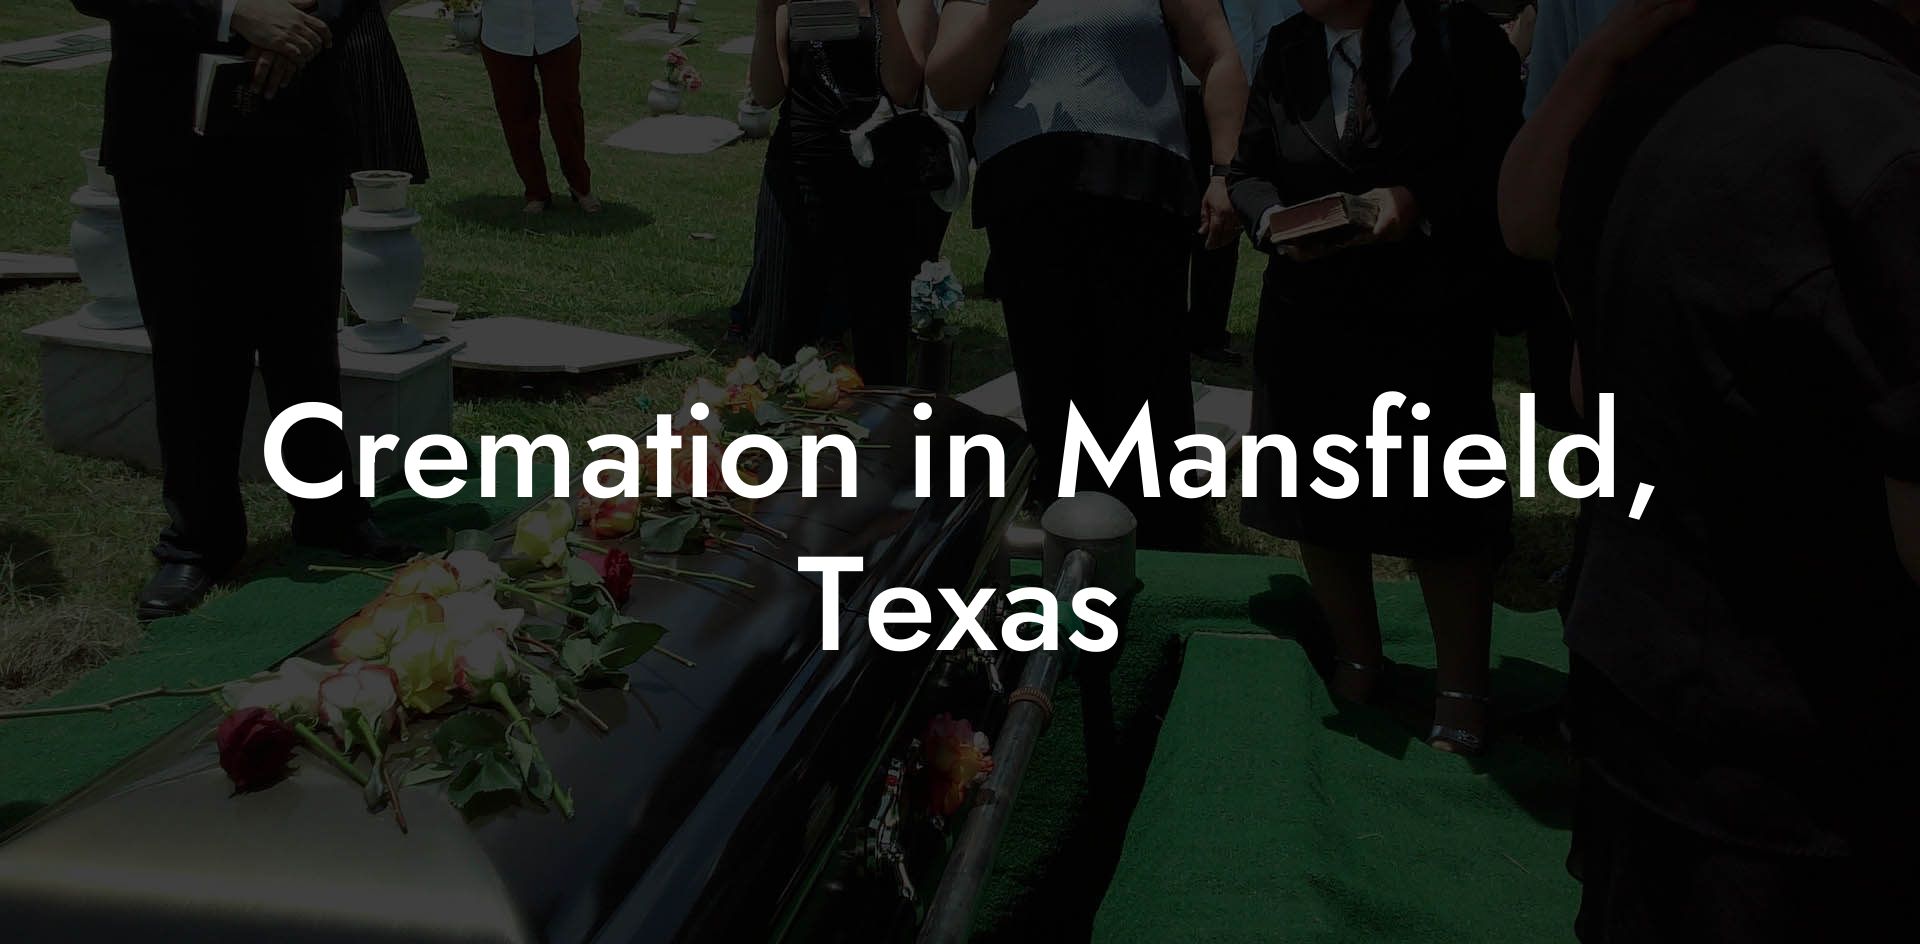 Cremation in Mansfield, Texas